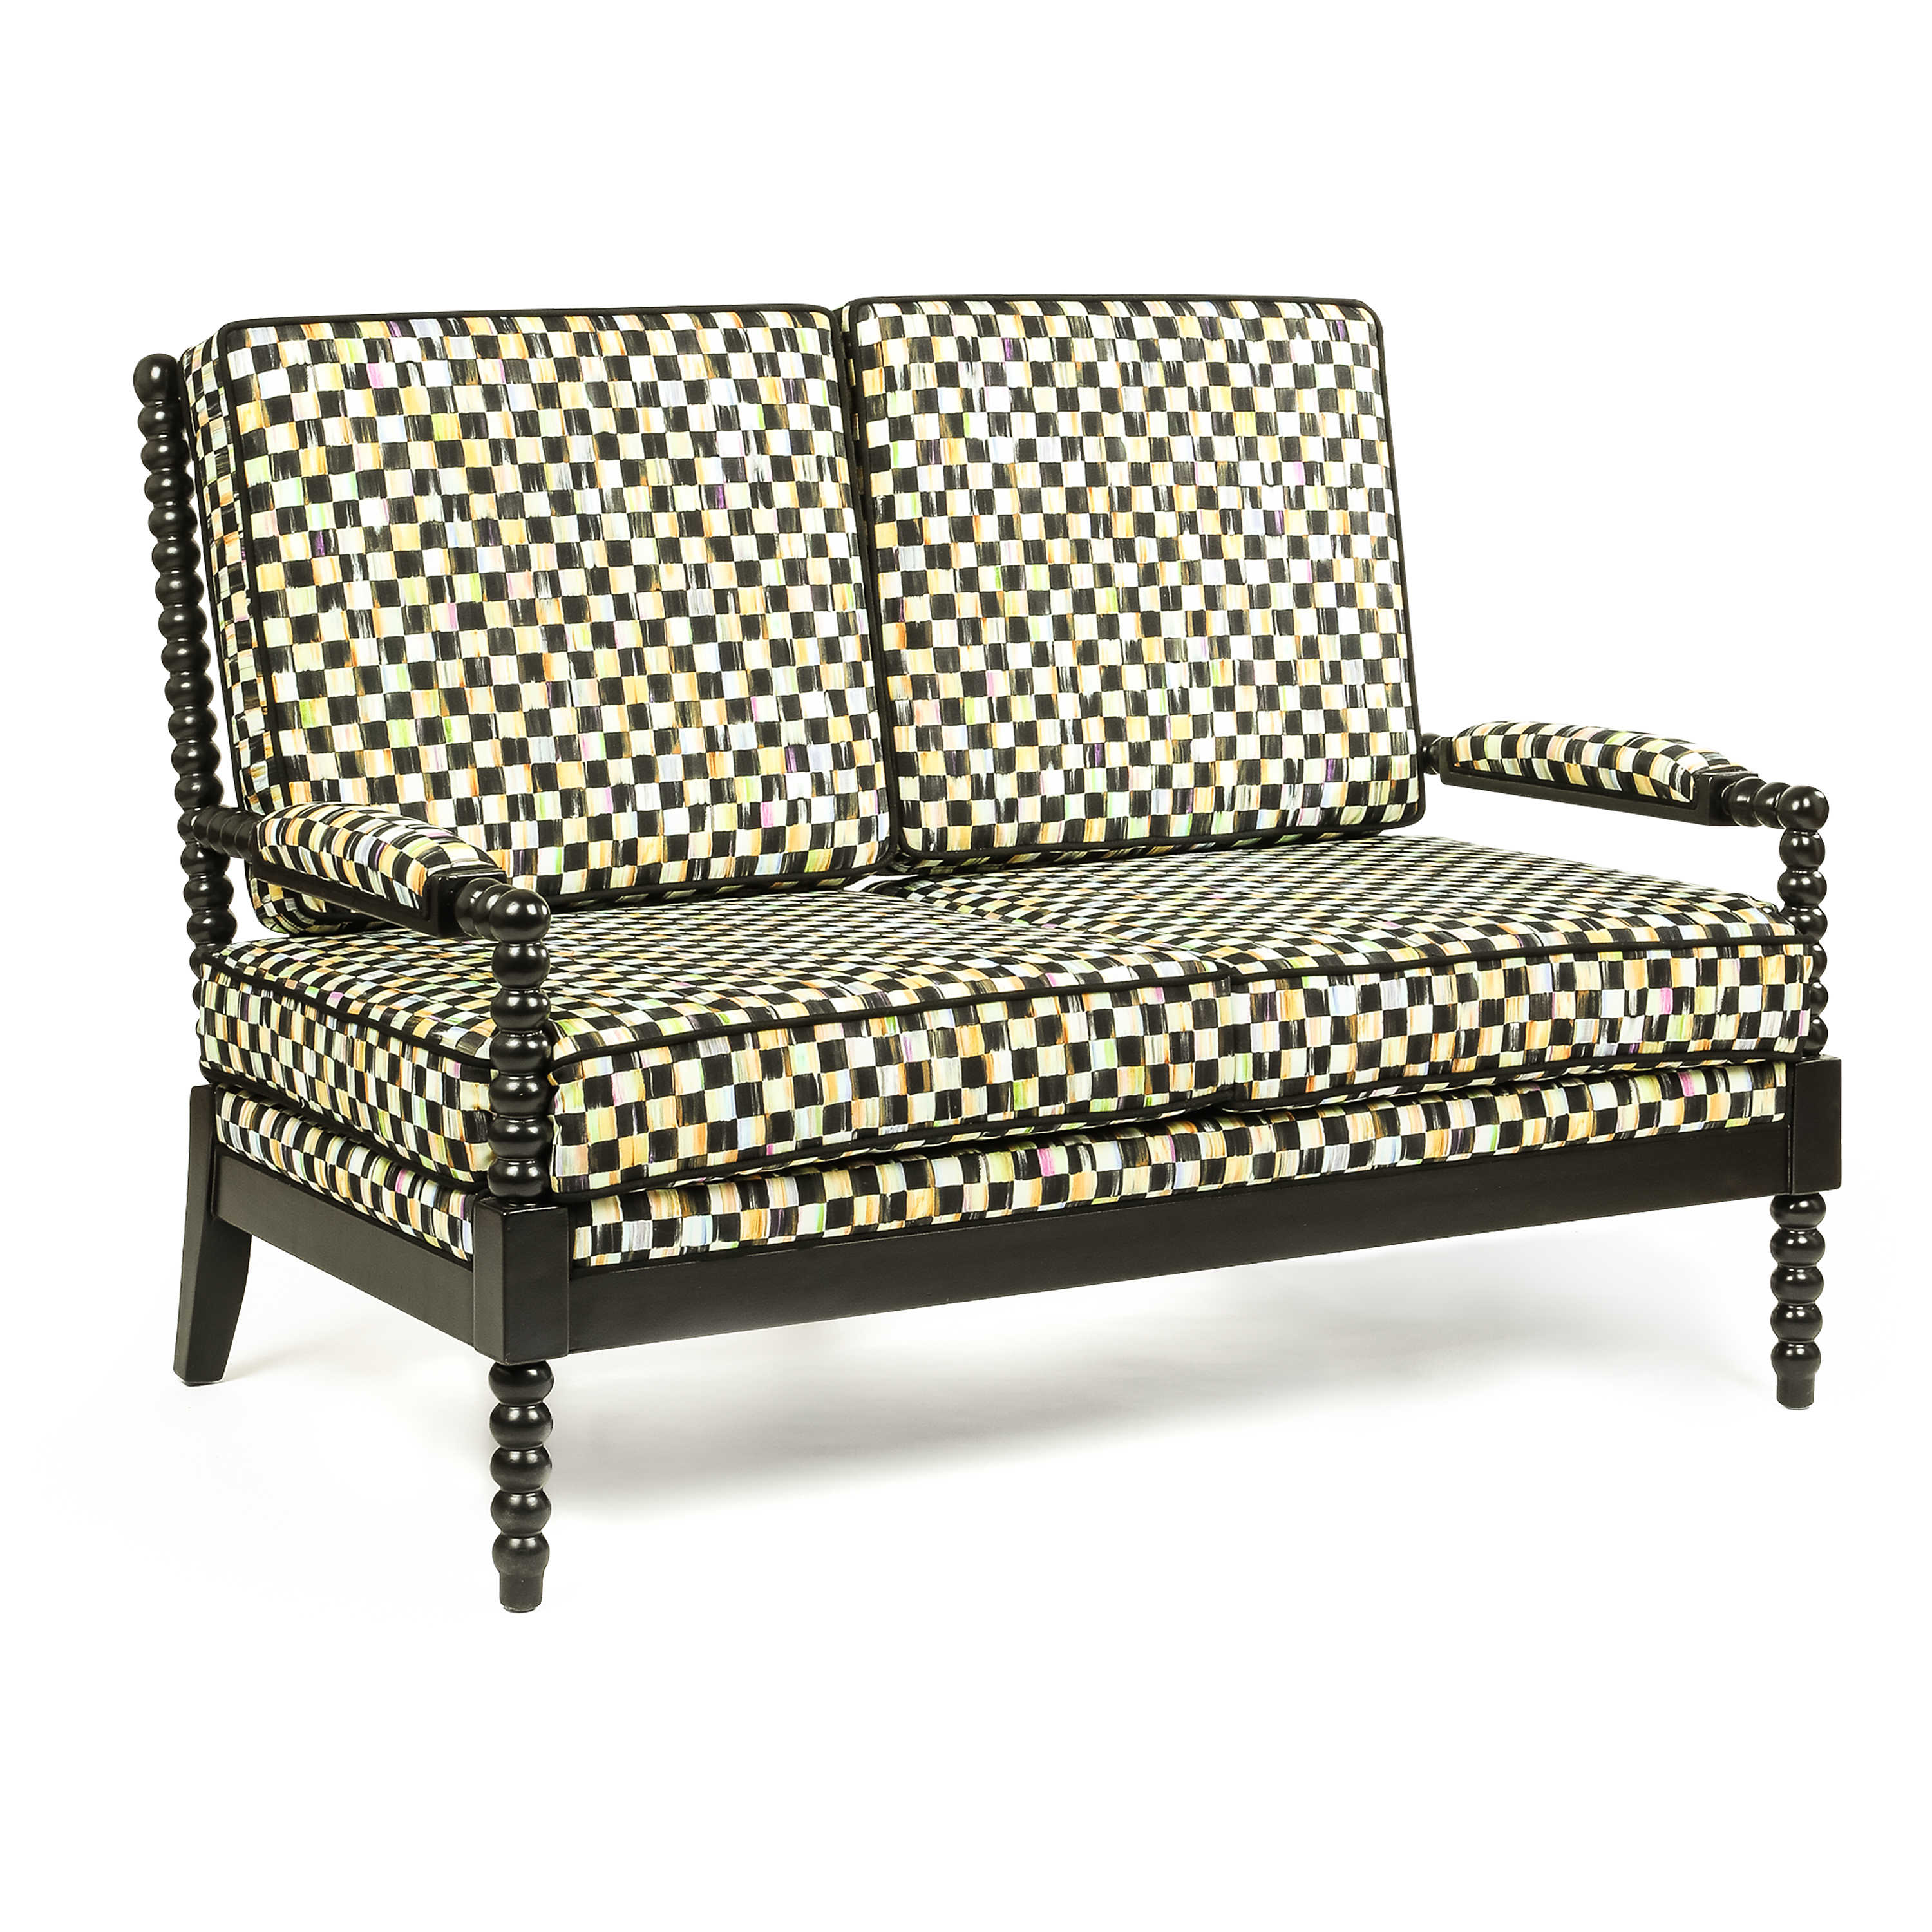 Spindle Check Outdoor Loveseat mackenzie-childs Panama 0